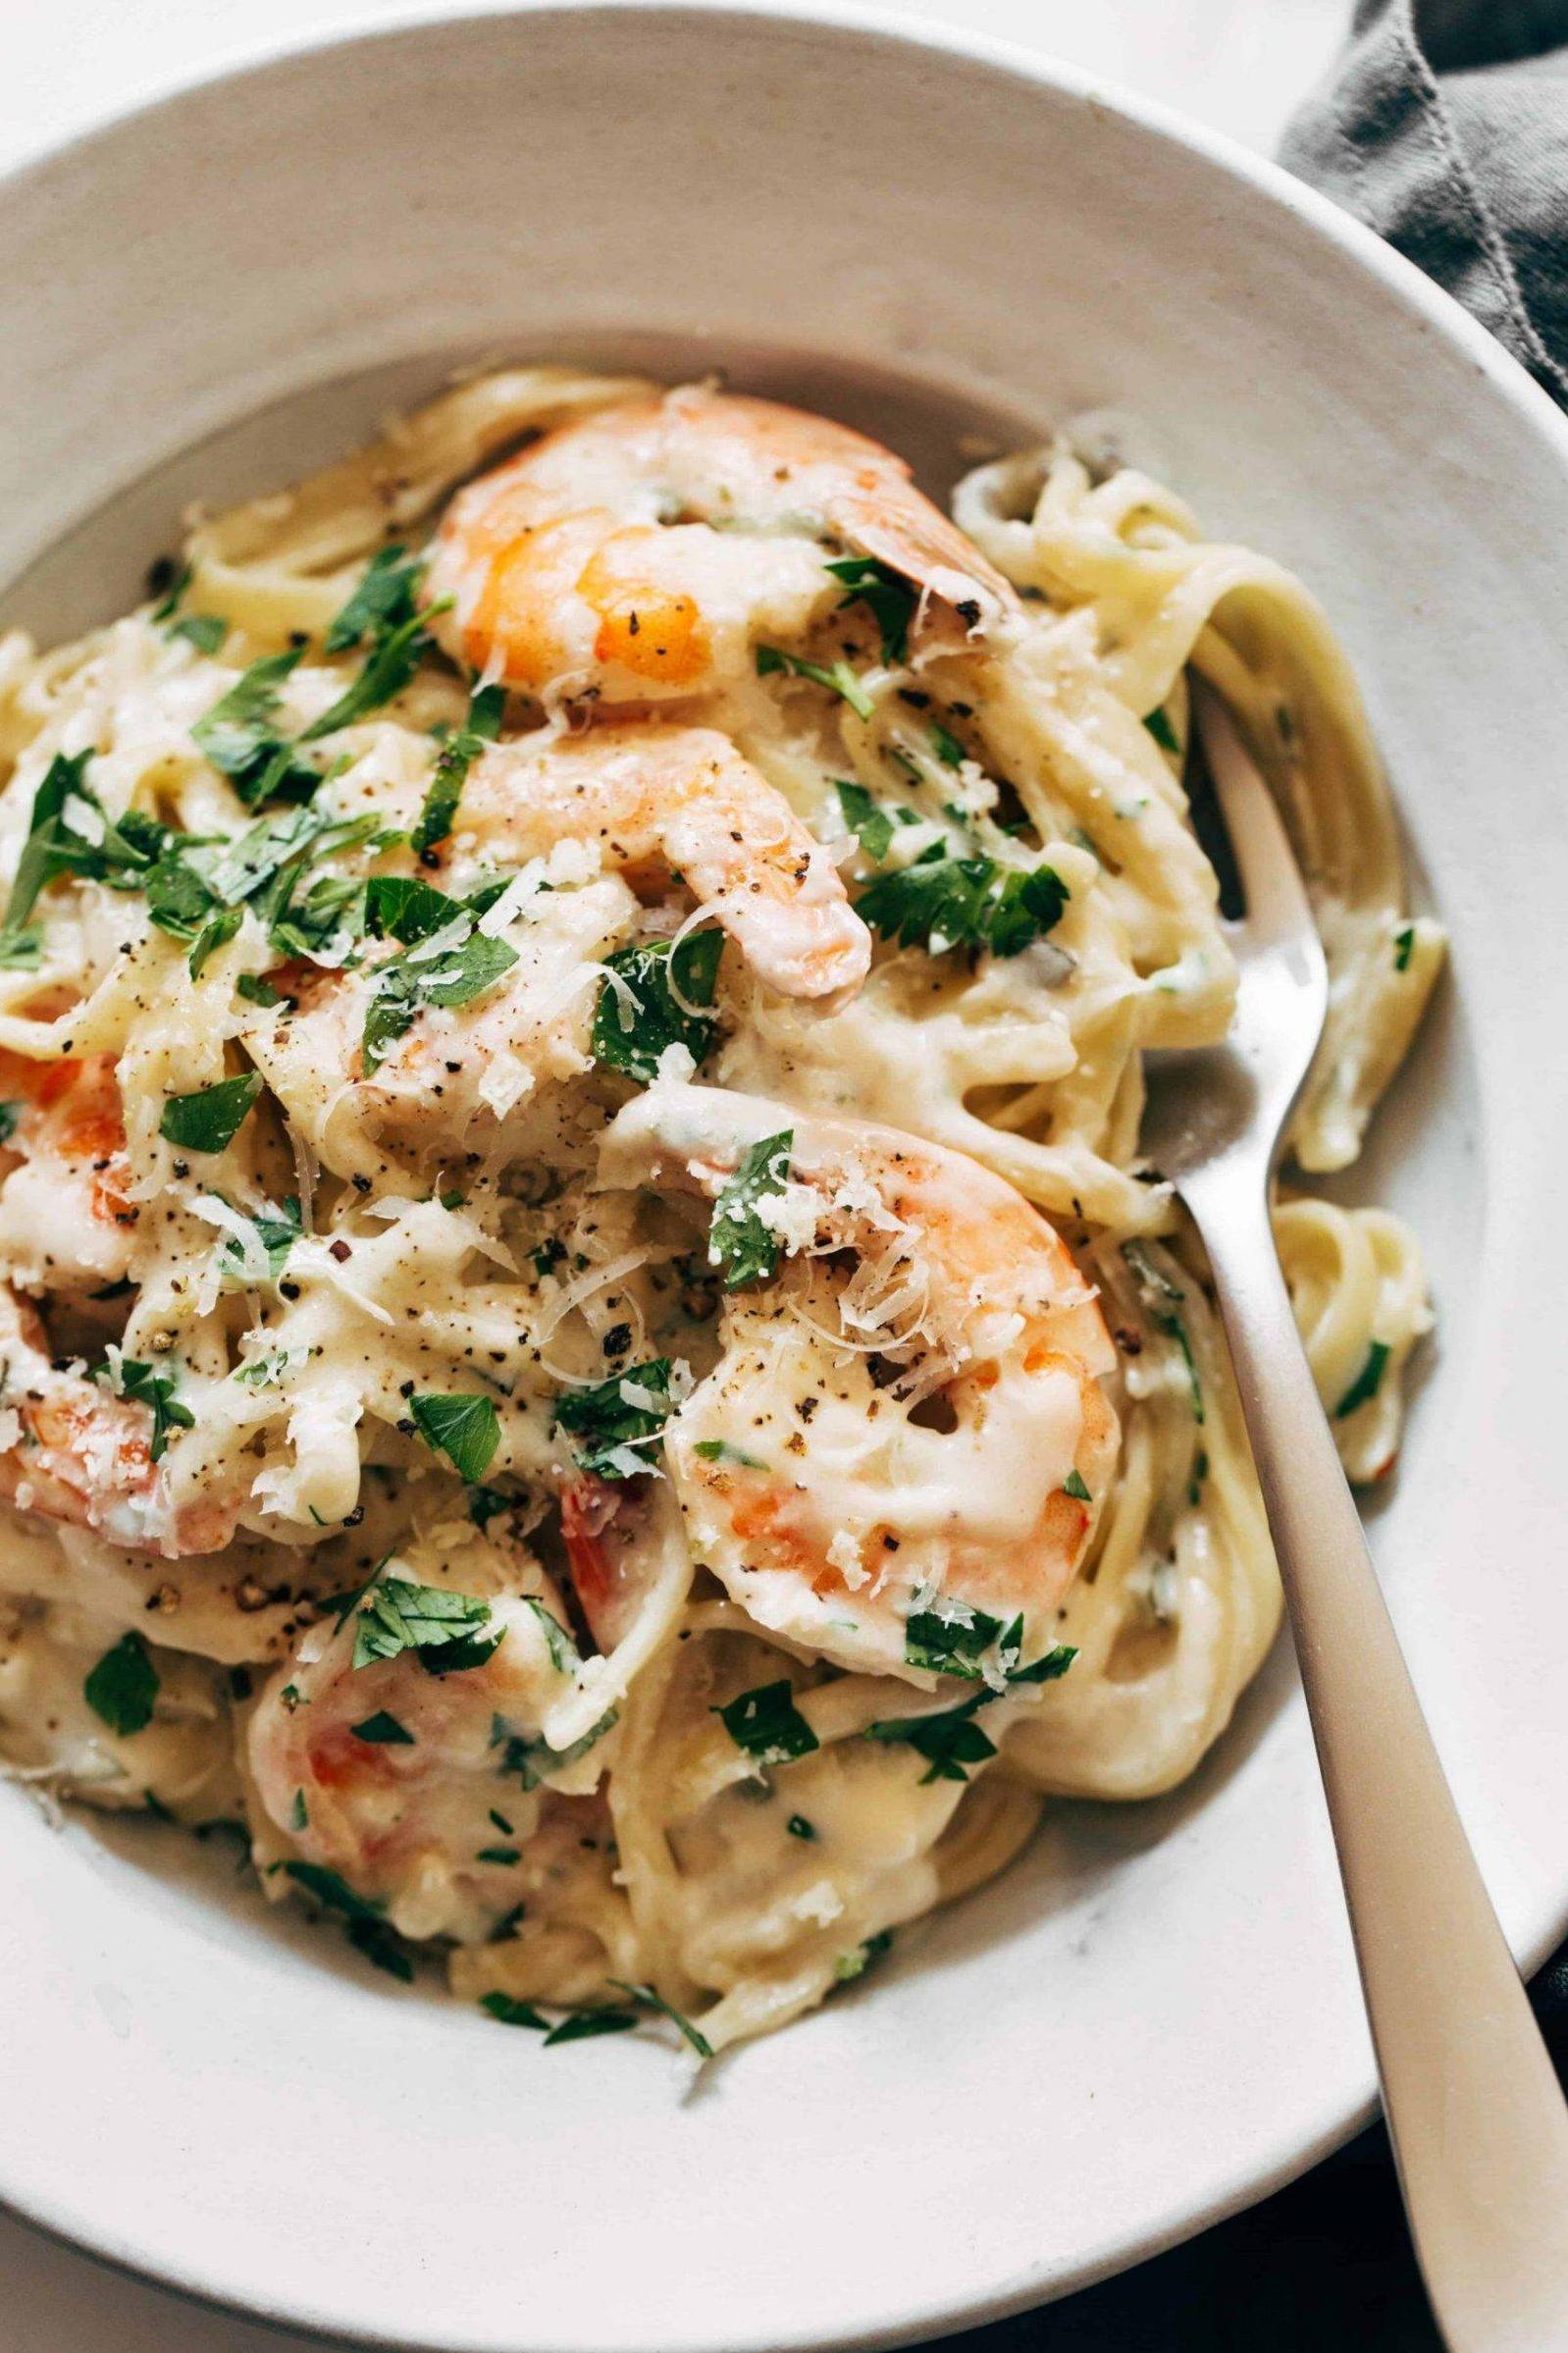  The perfect balance of tangy, savory, and sweet paired with succulent shrimp.